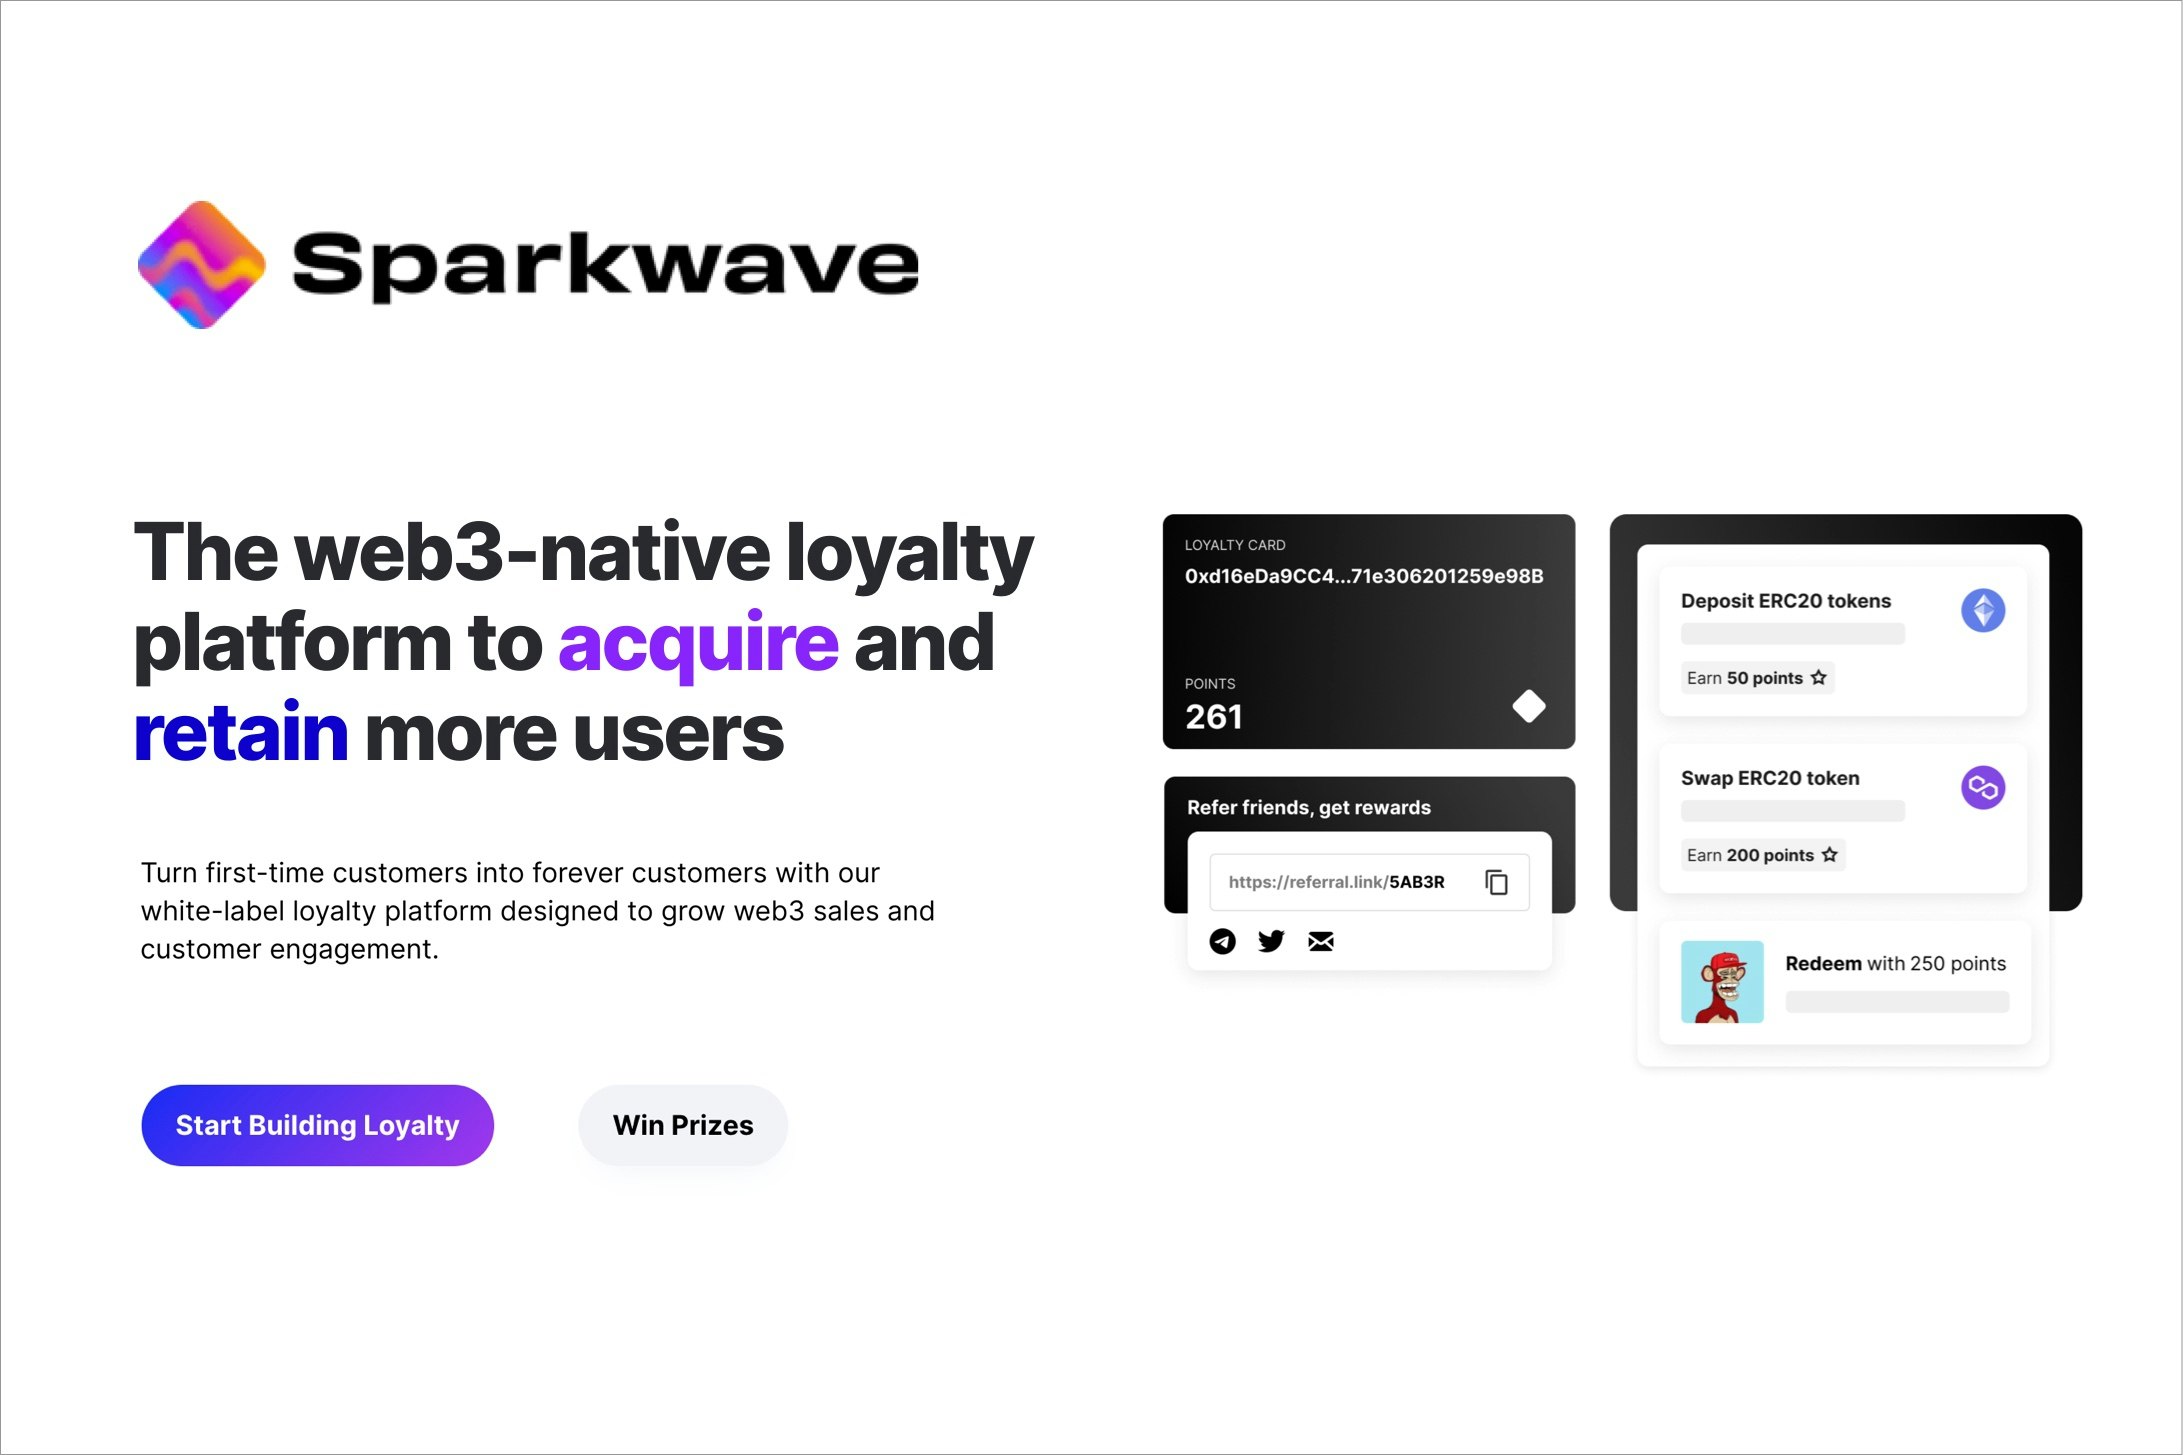 startuptile Sparkwave-The web3-native loyalty platform to acquire and retain users